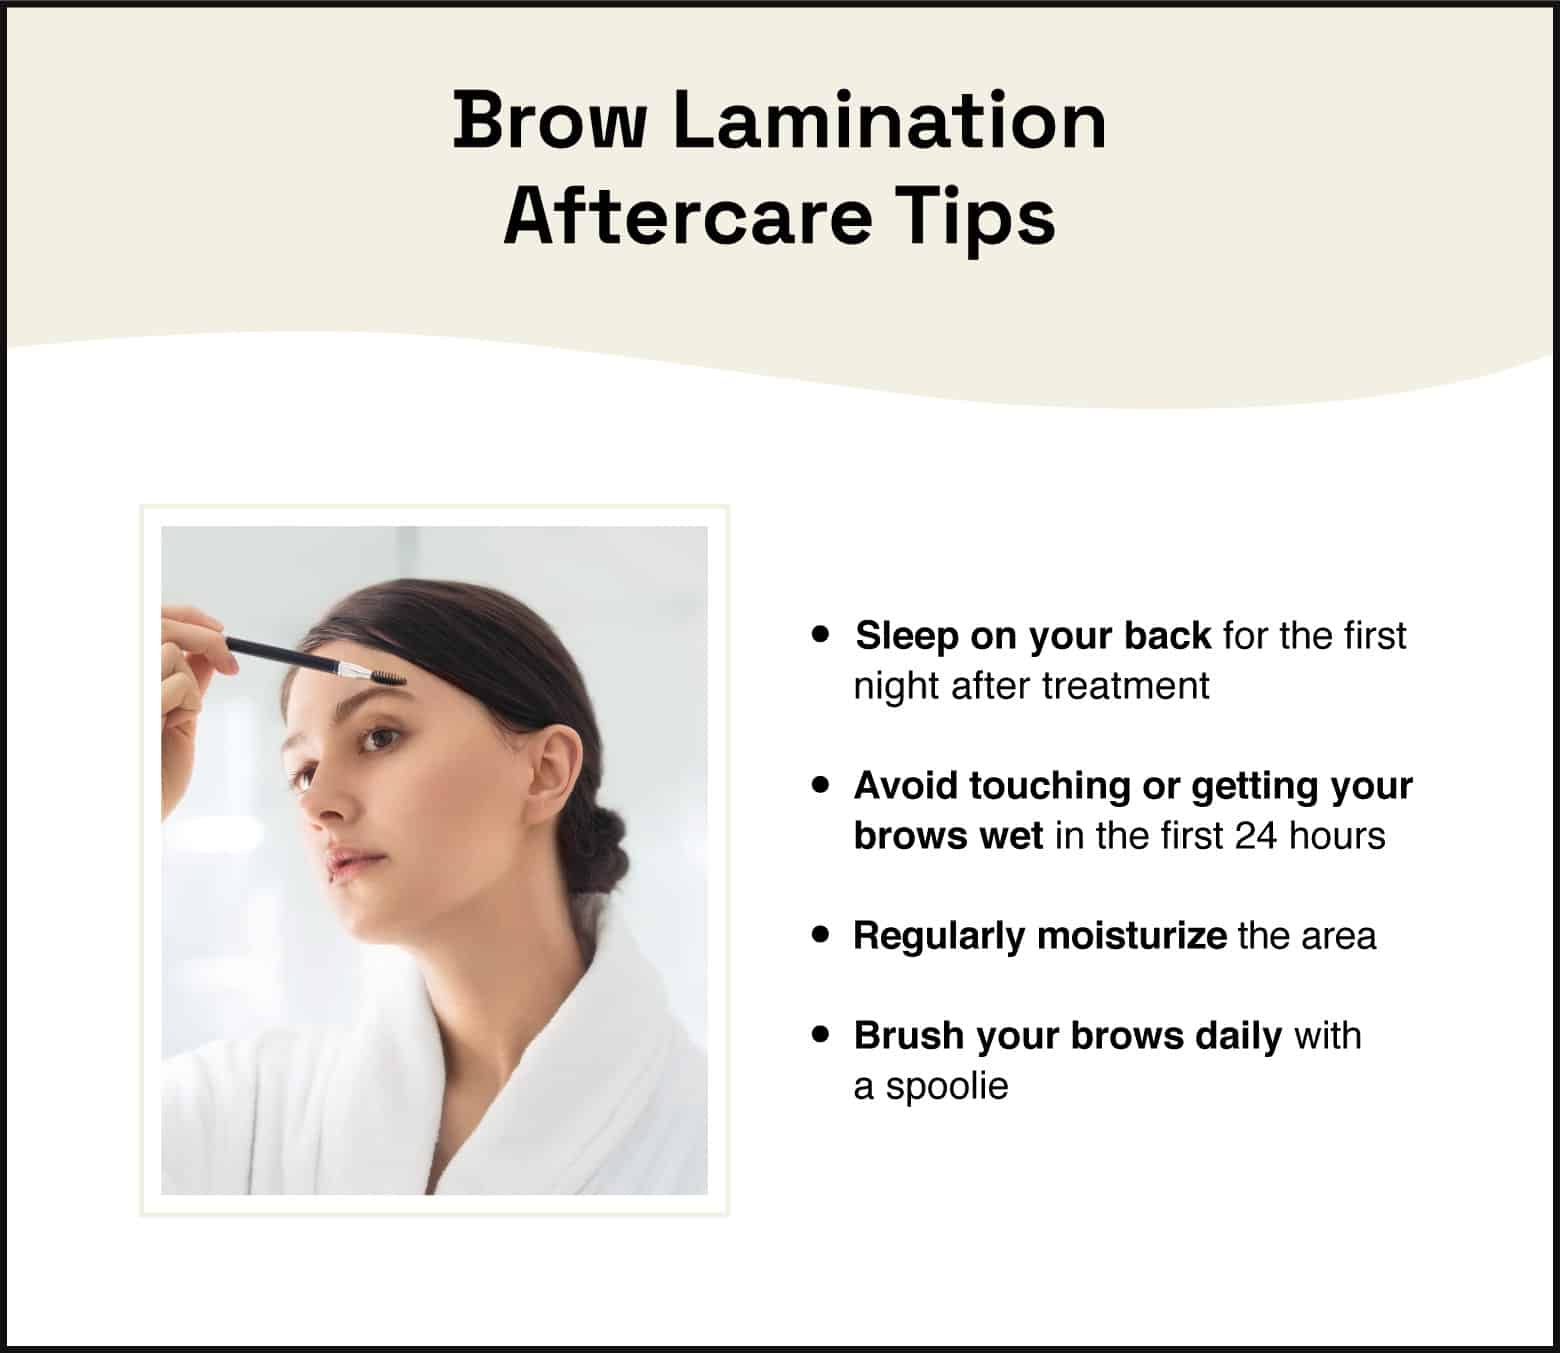 brow lamination aftercare tips